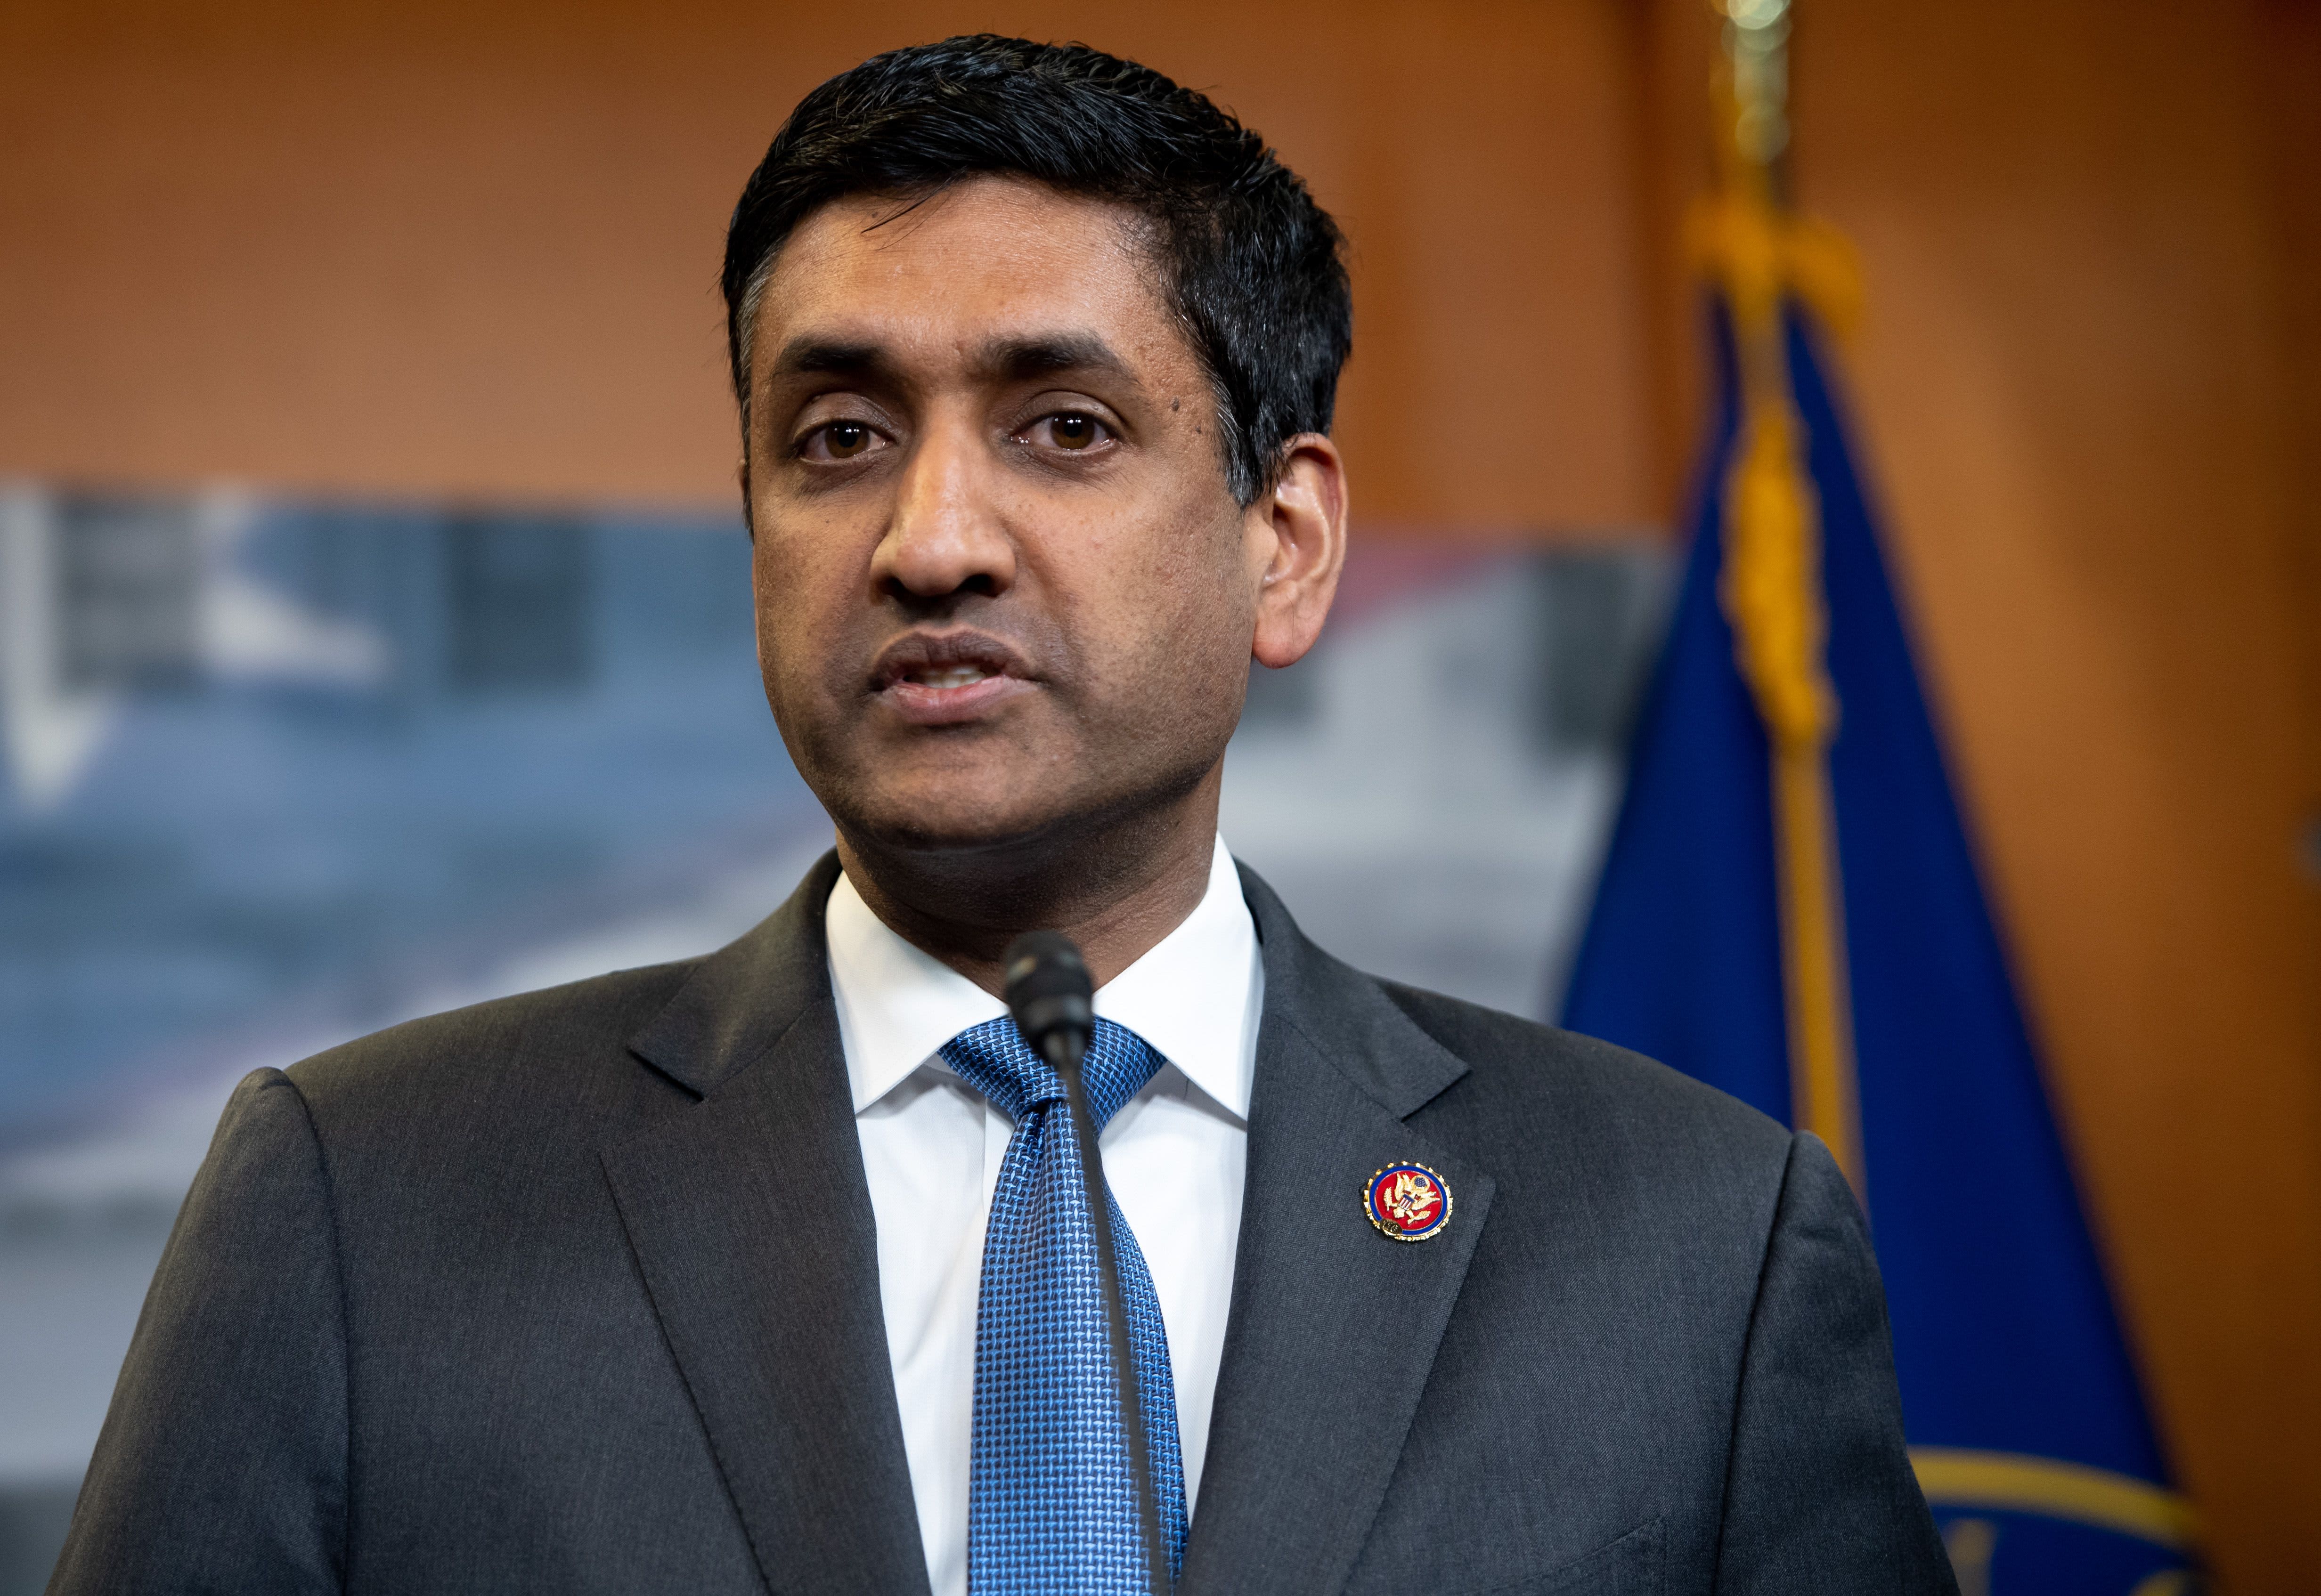 IRS will audit more millionaires, companies under Ro Khanna’s bill